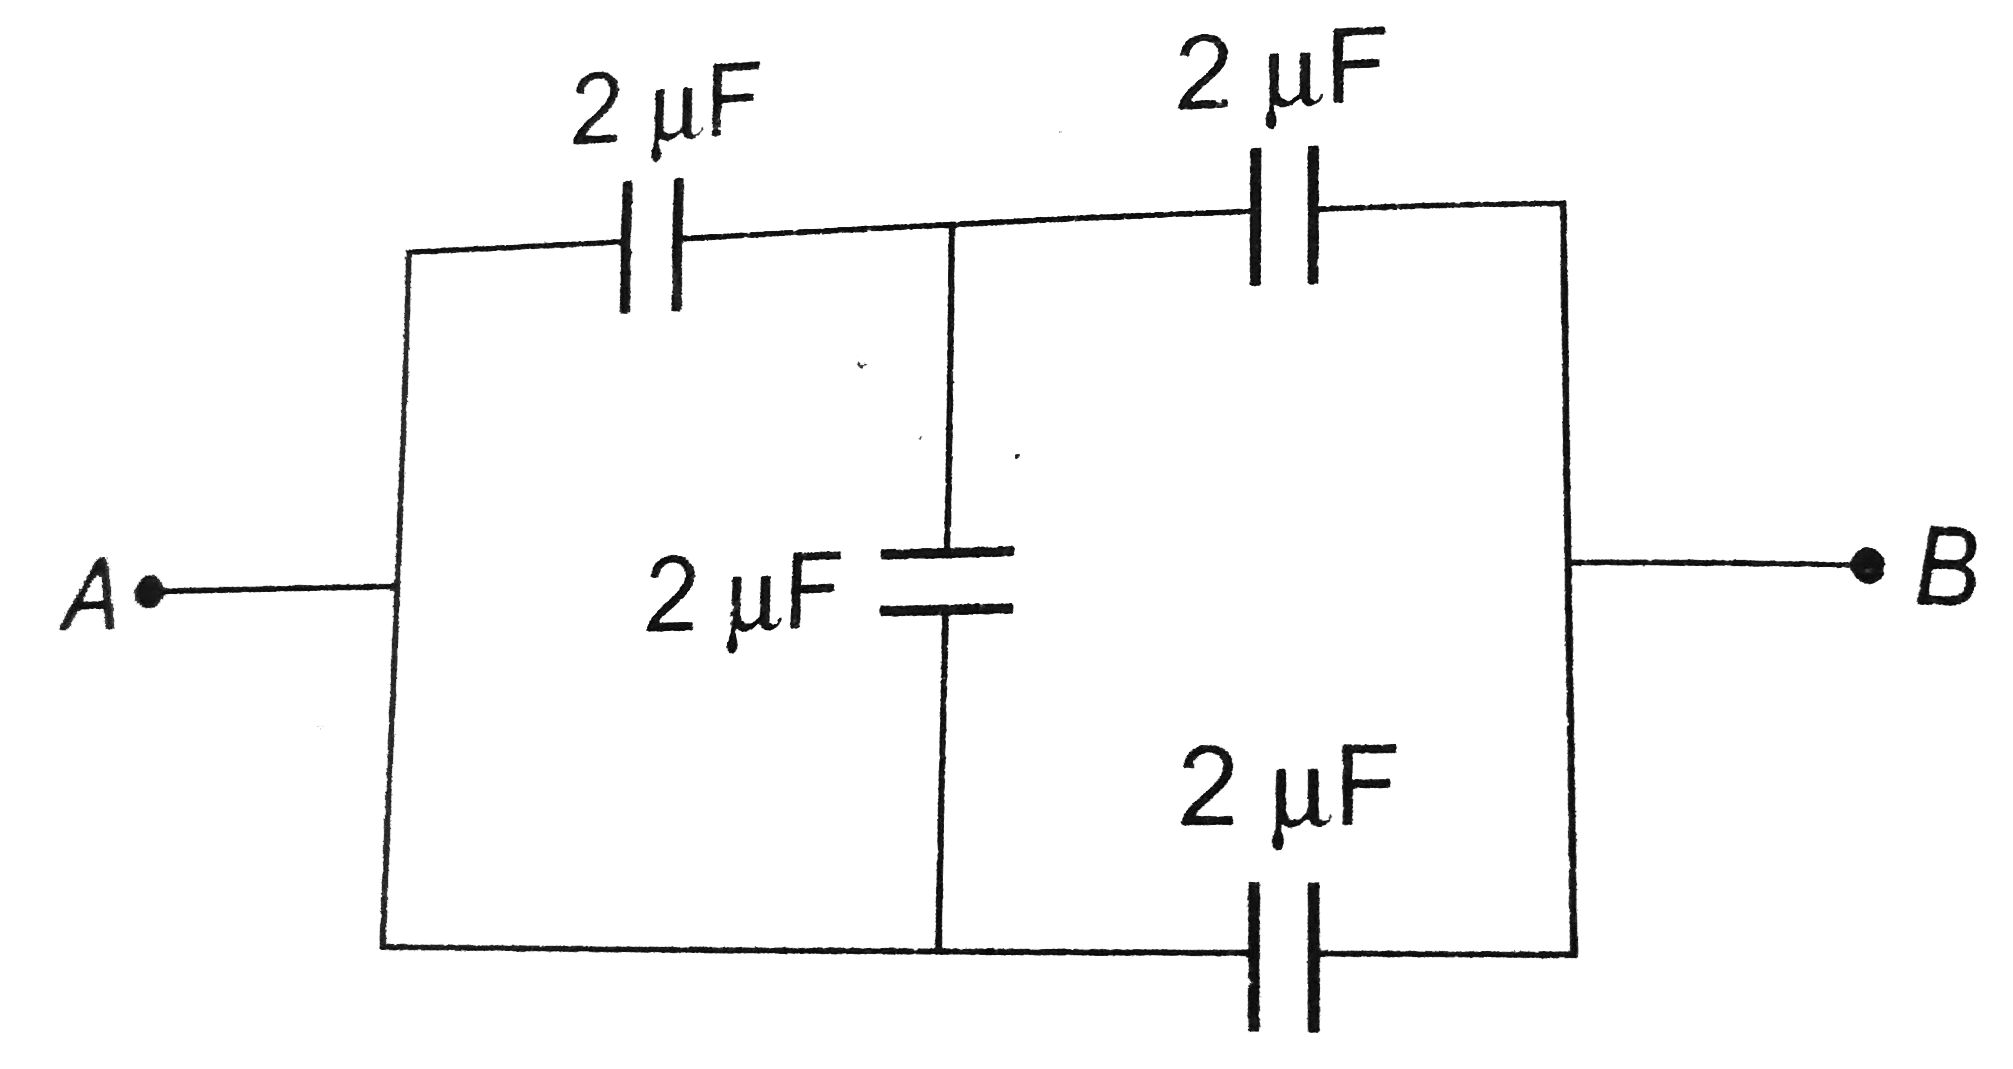 Four capacitors are connected in a circuit as shown in the figure. The effective capacitance in muF between points A and B will be